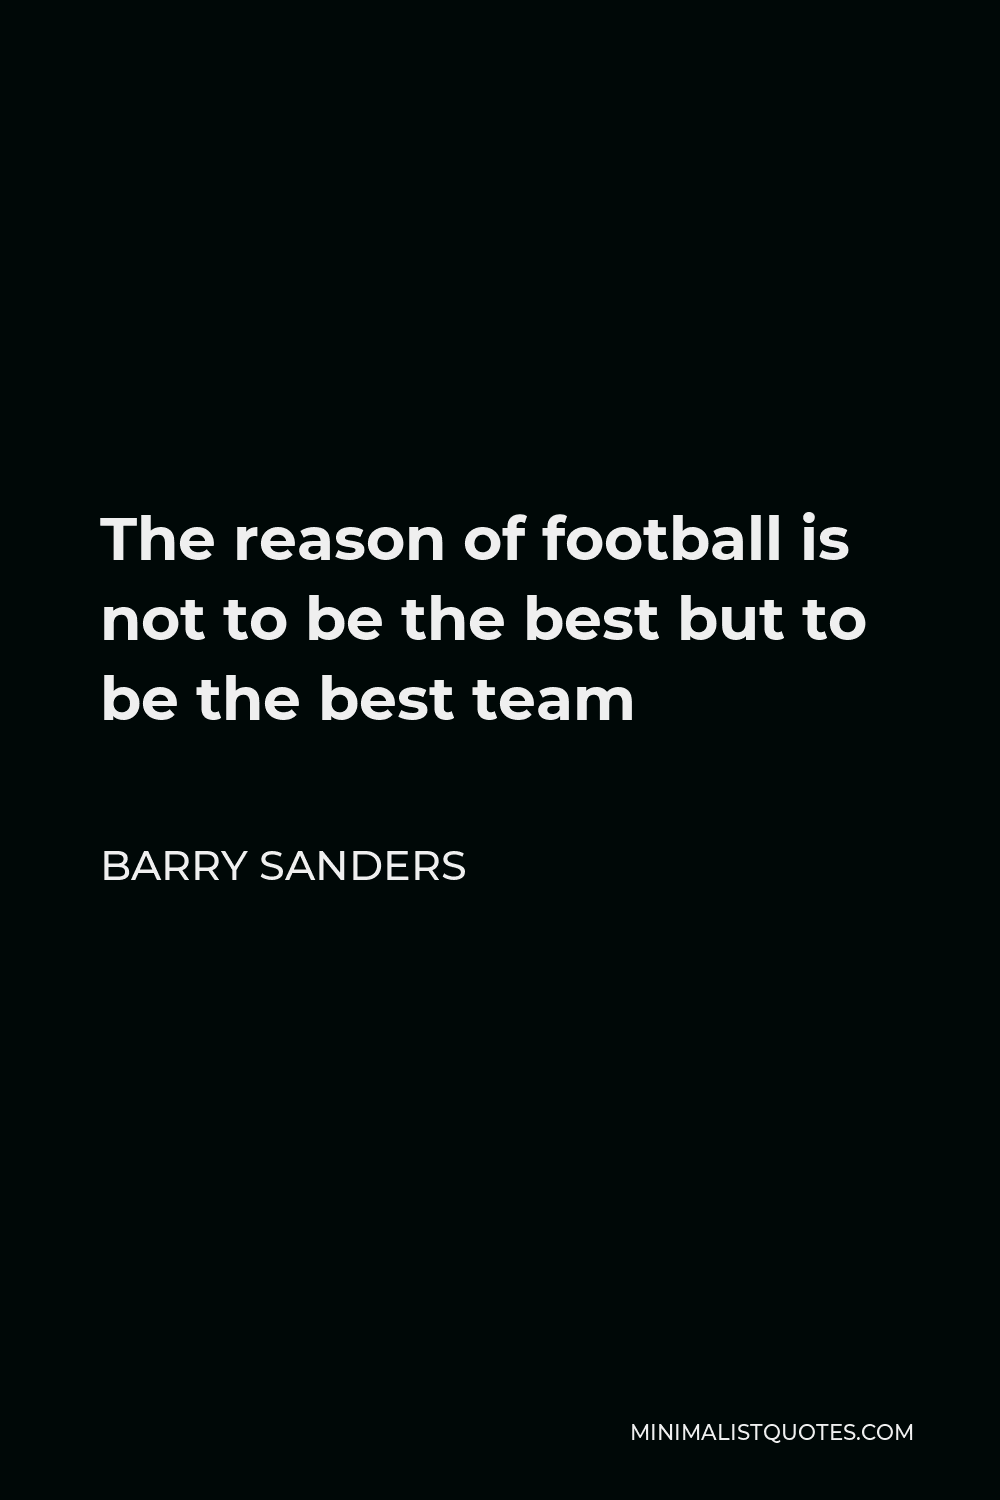 Barry Sanders Quote - The reason of football is not to be the best but to be the best team